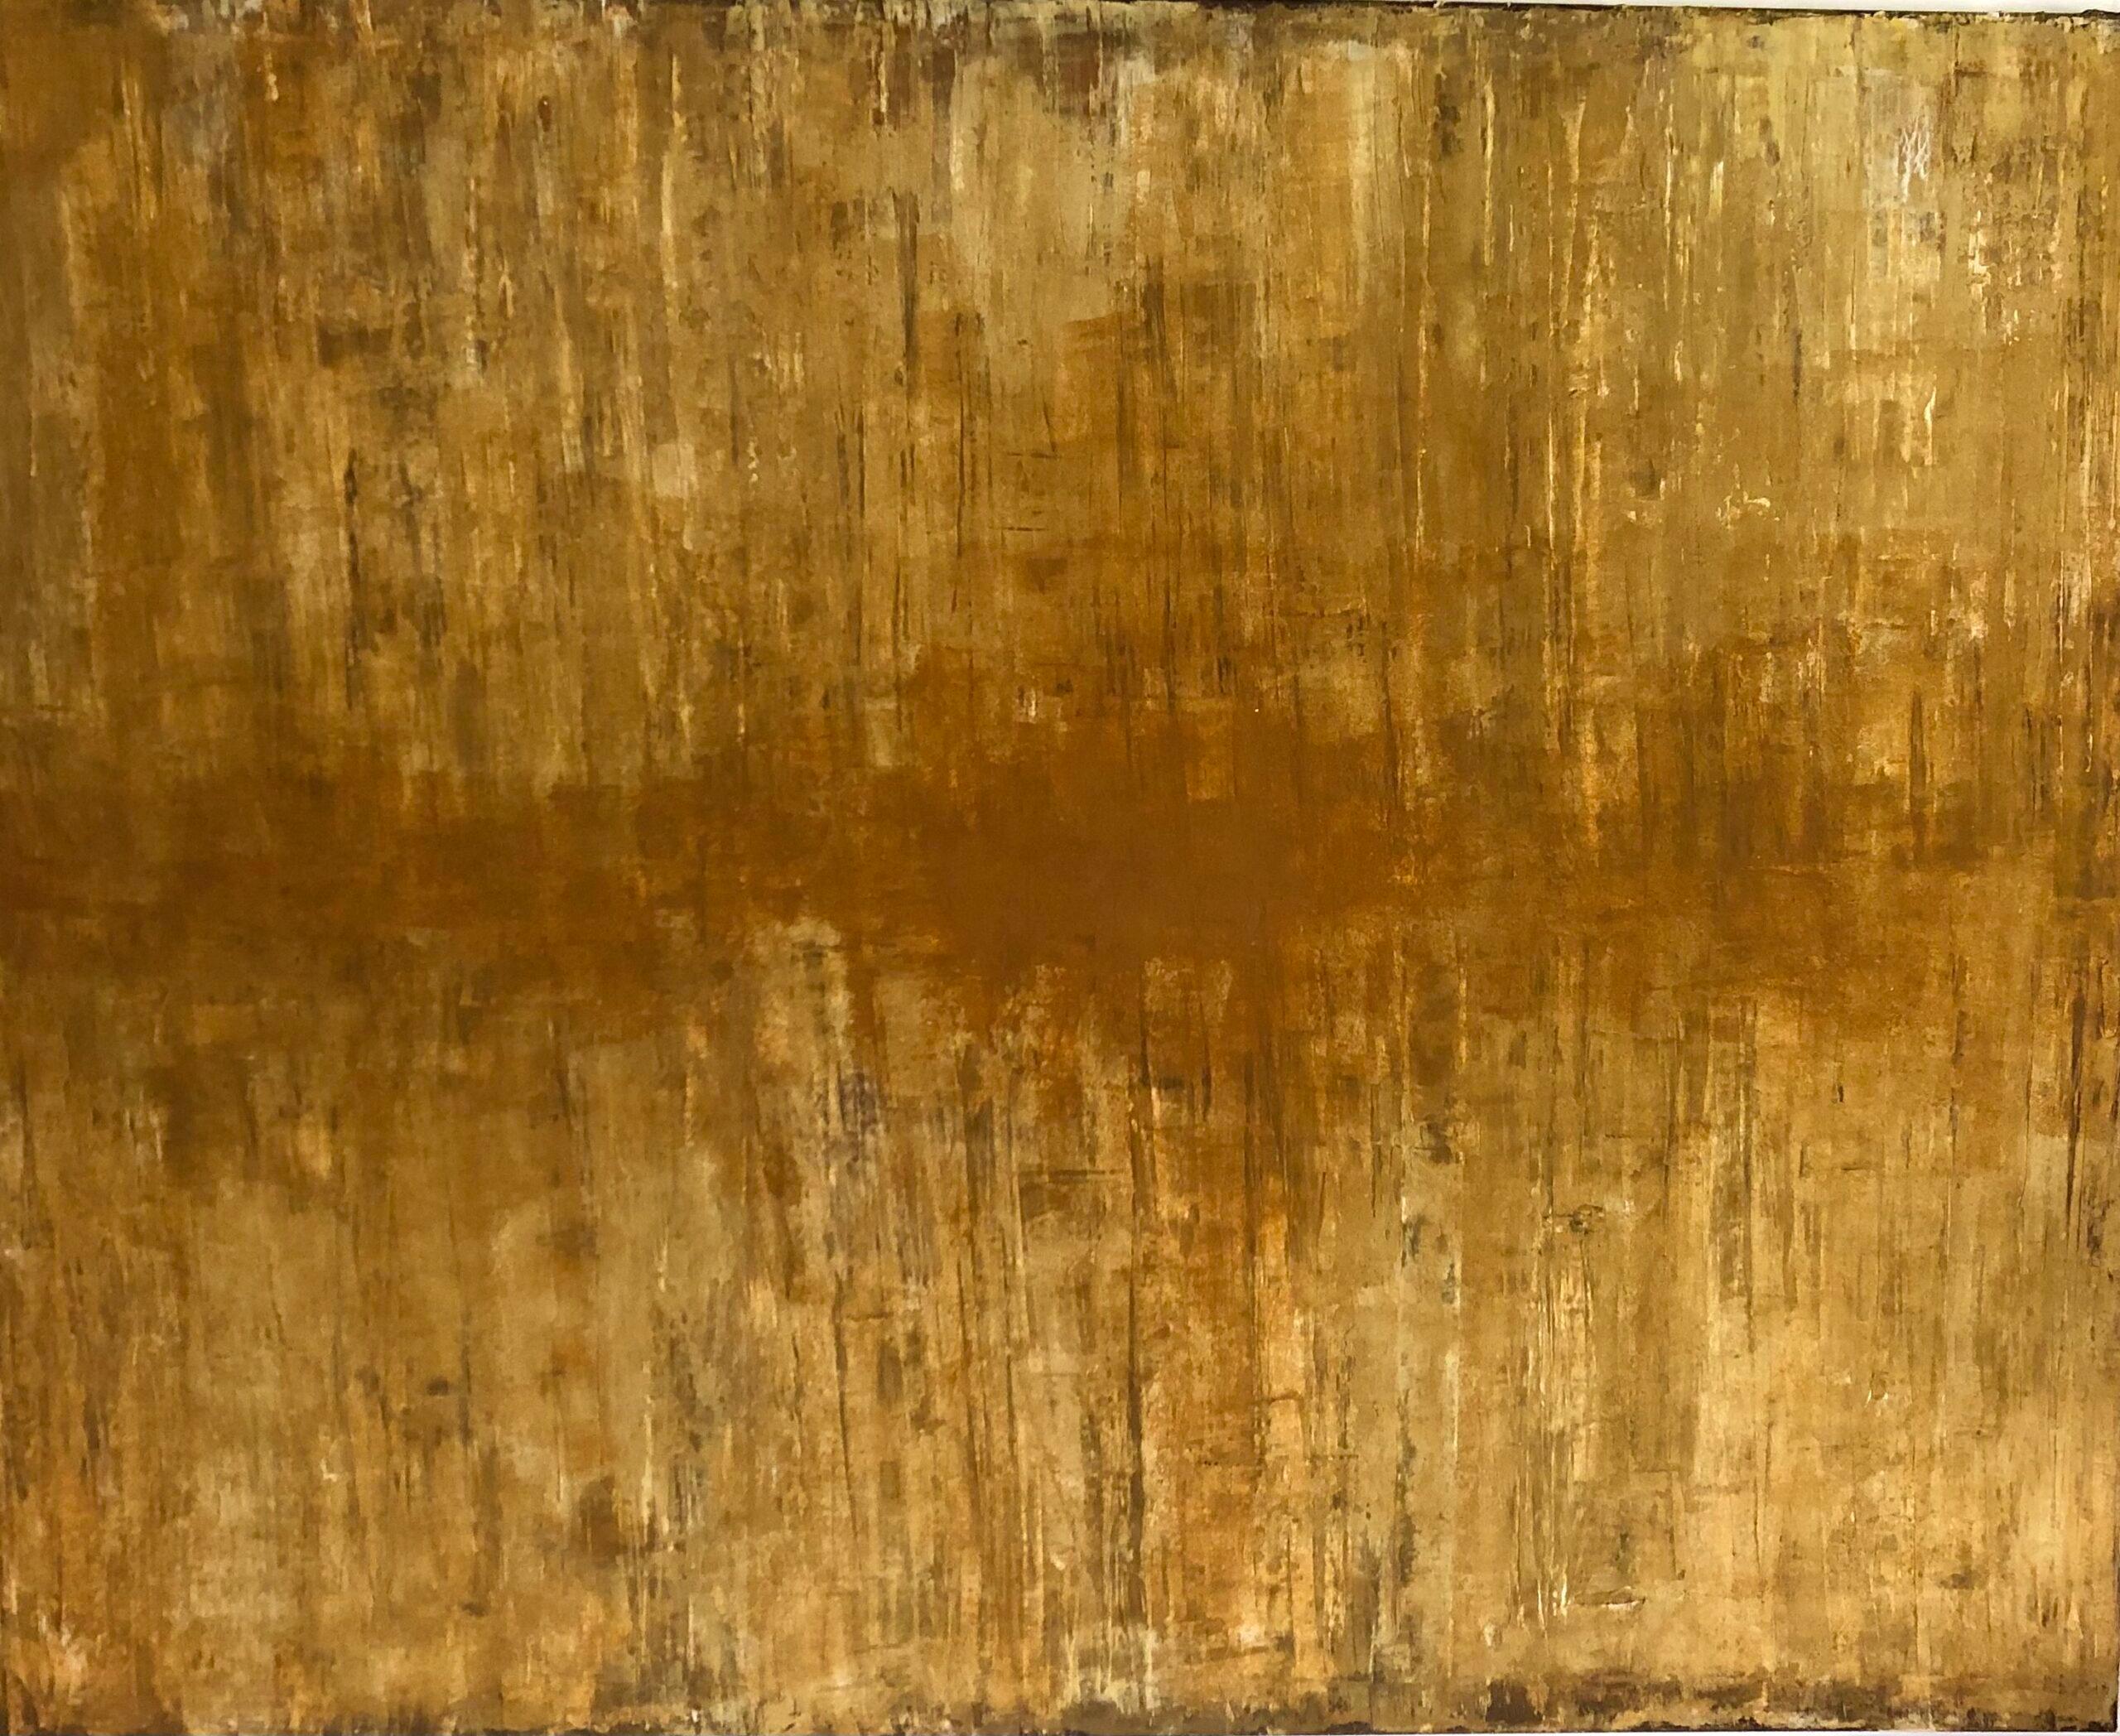 GOLD - Painting by Berta Giner